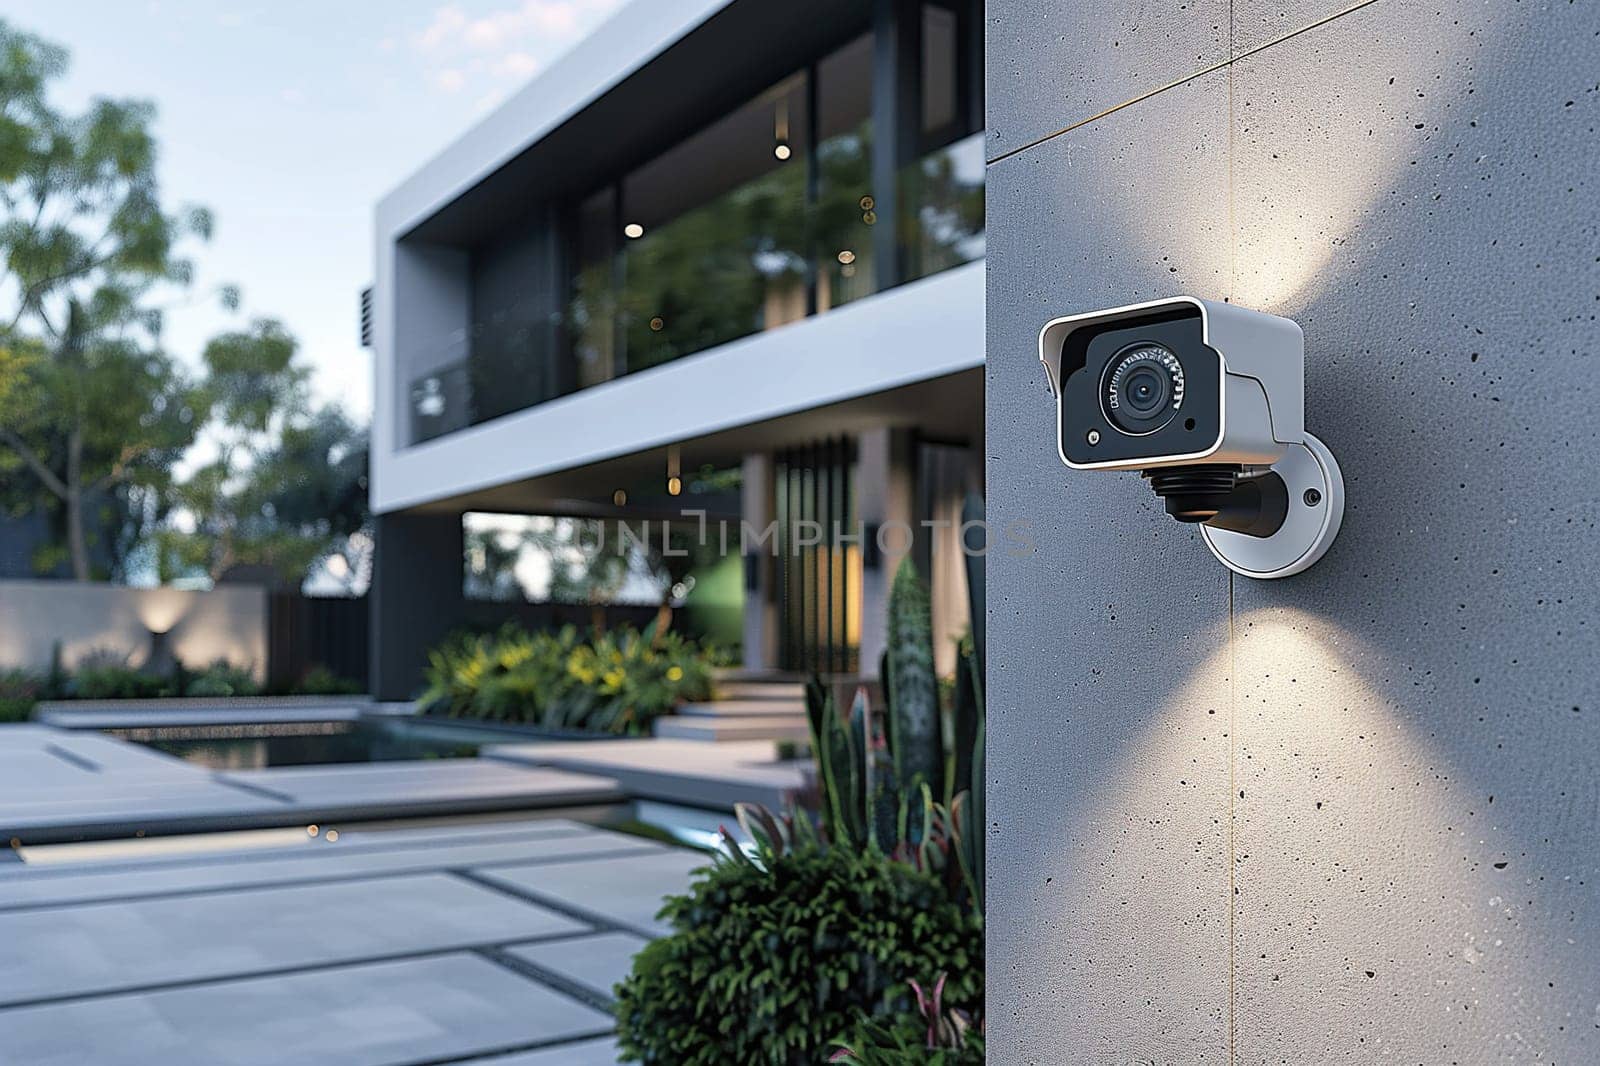 An IP camera is installed on the wall of a luxury house. The concept of protecting private property.